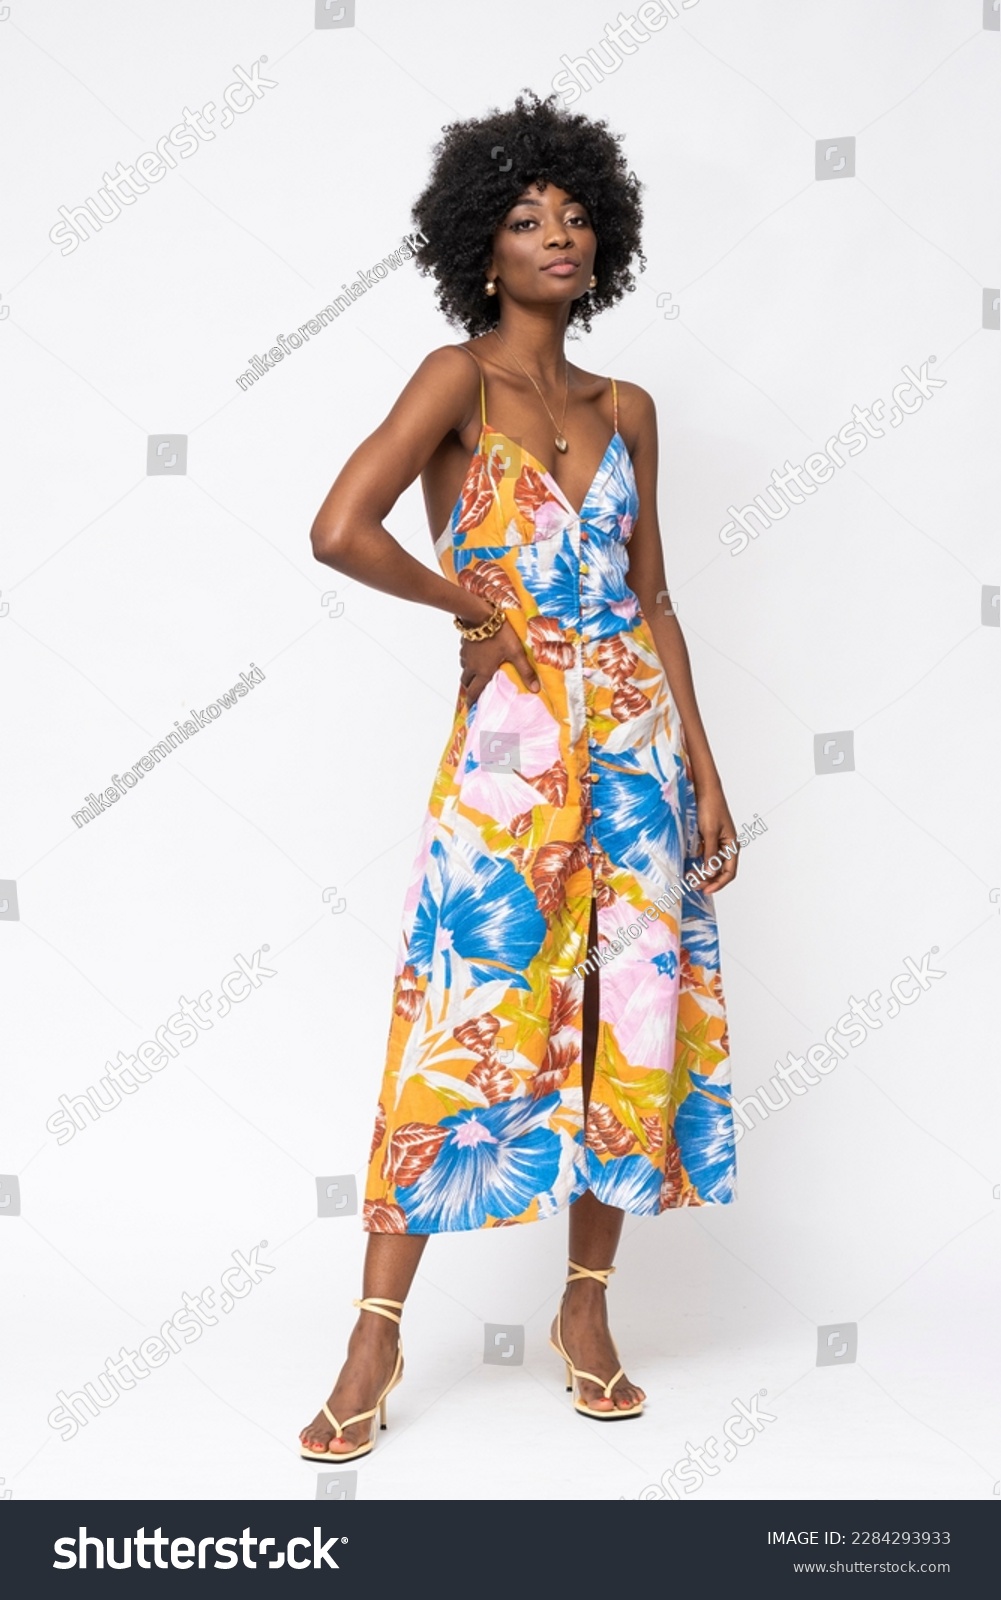 Fashionable African woman with curly hairs and floral dress on isolated white background. #2284293933